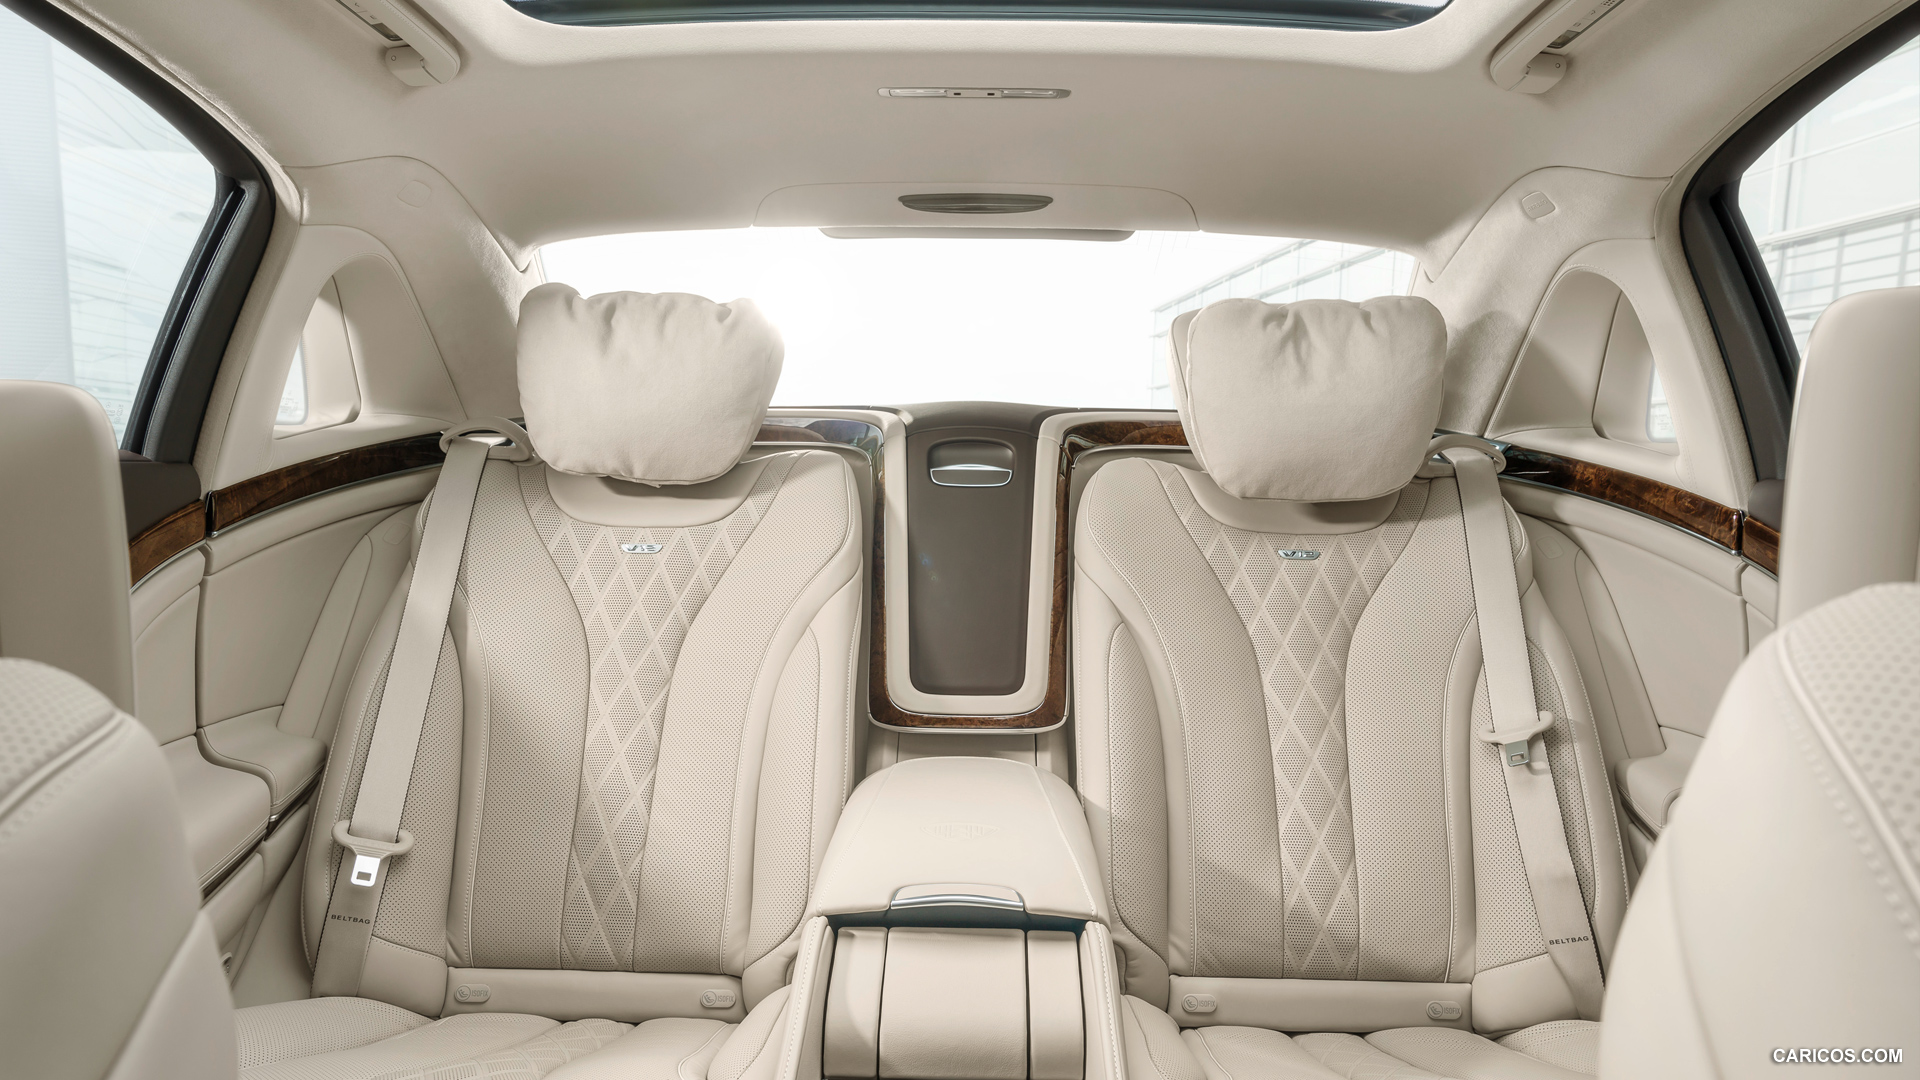 2016 Mercedes-Maybach S-Class S600 - Interior Rear Seats, #42 of 225